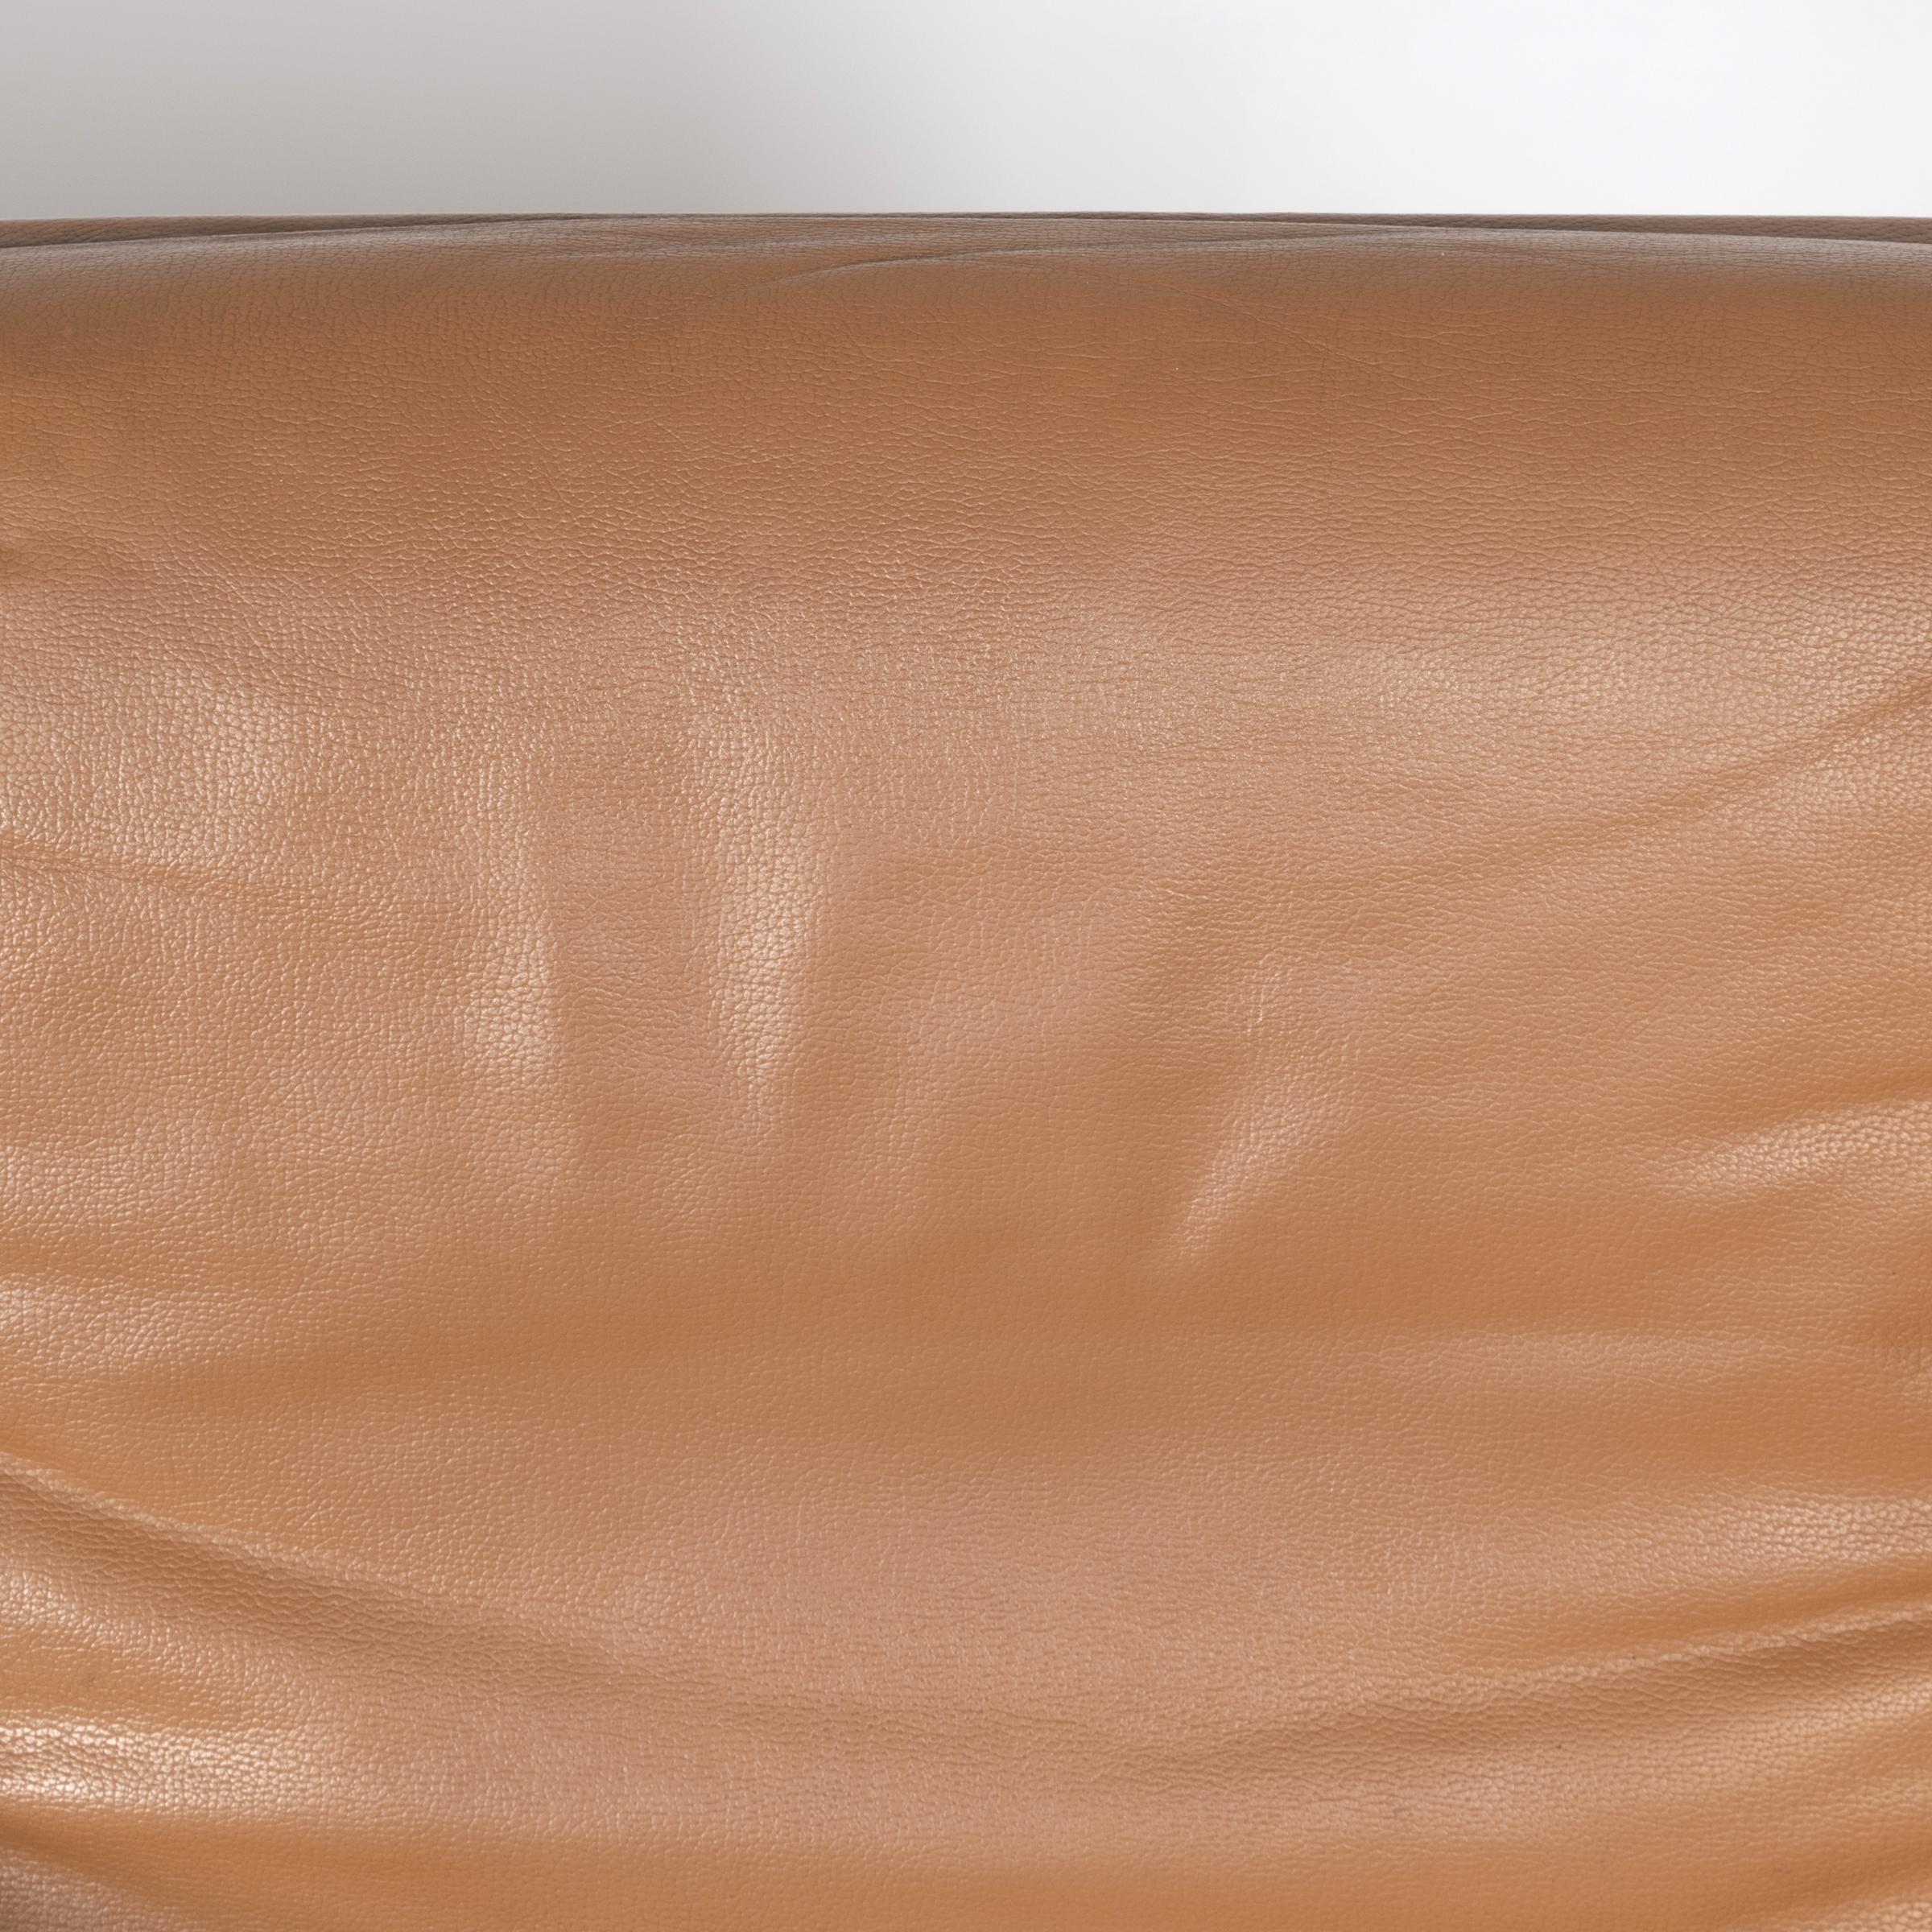 Delta Design Program 2000 Soft Pad Chairs in Cognac Leather for Wilkhahn, 1968 3